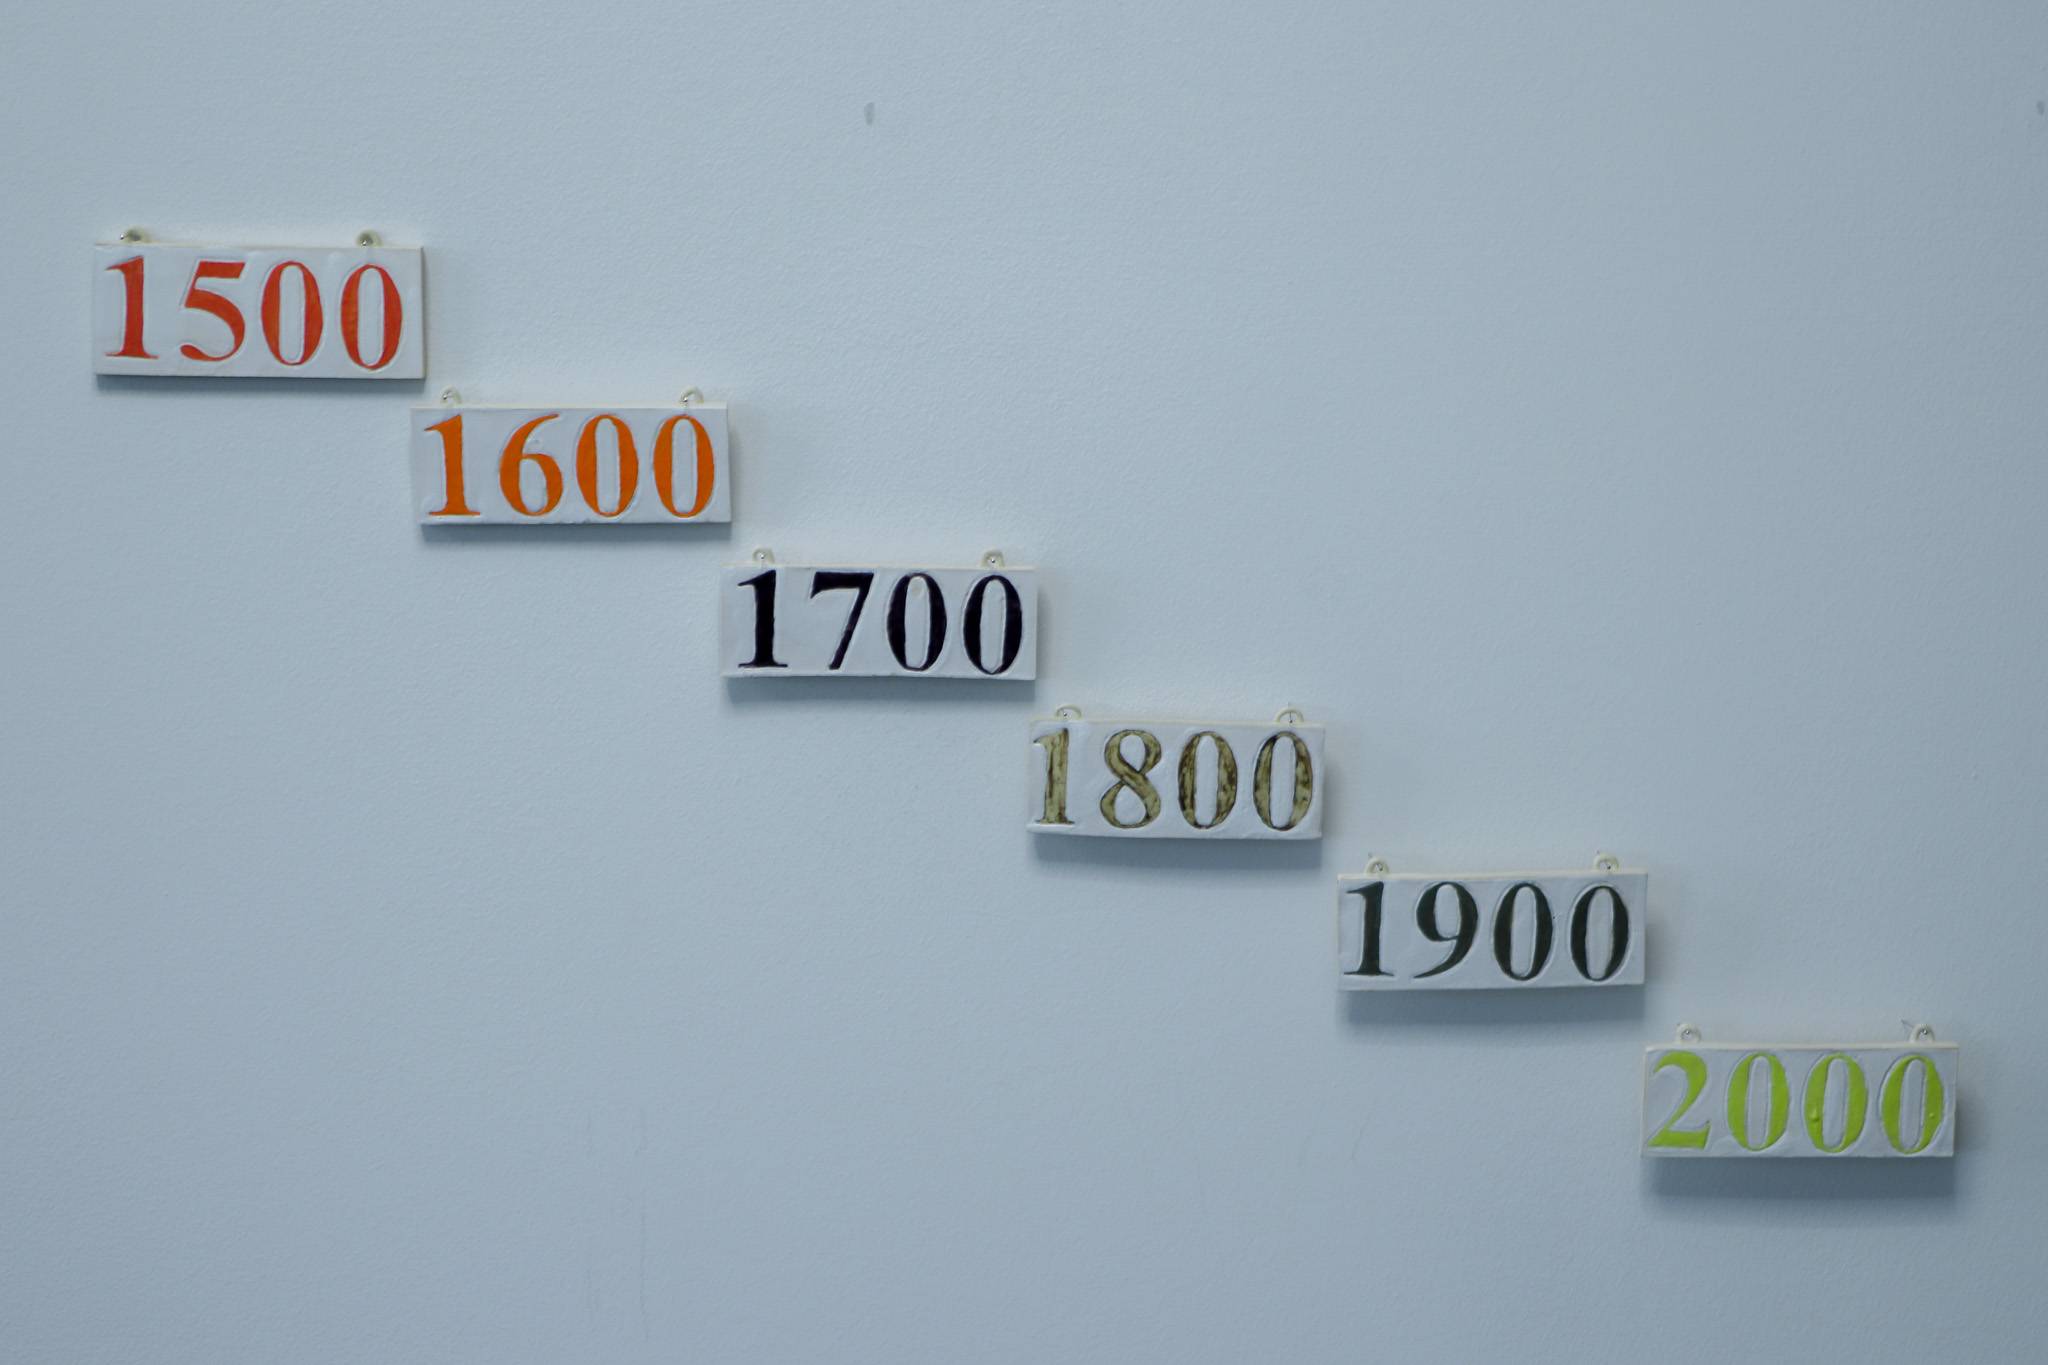 The centuries listed from 1500-2000.